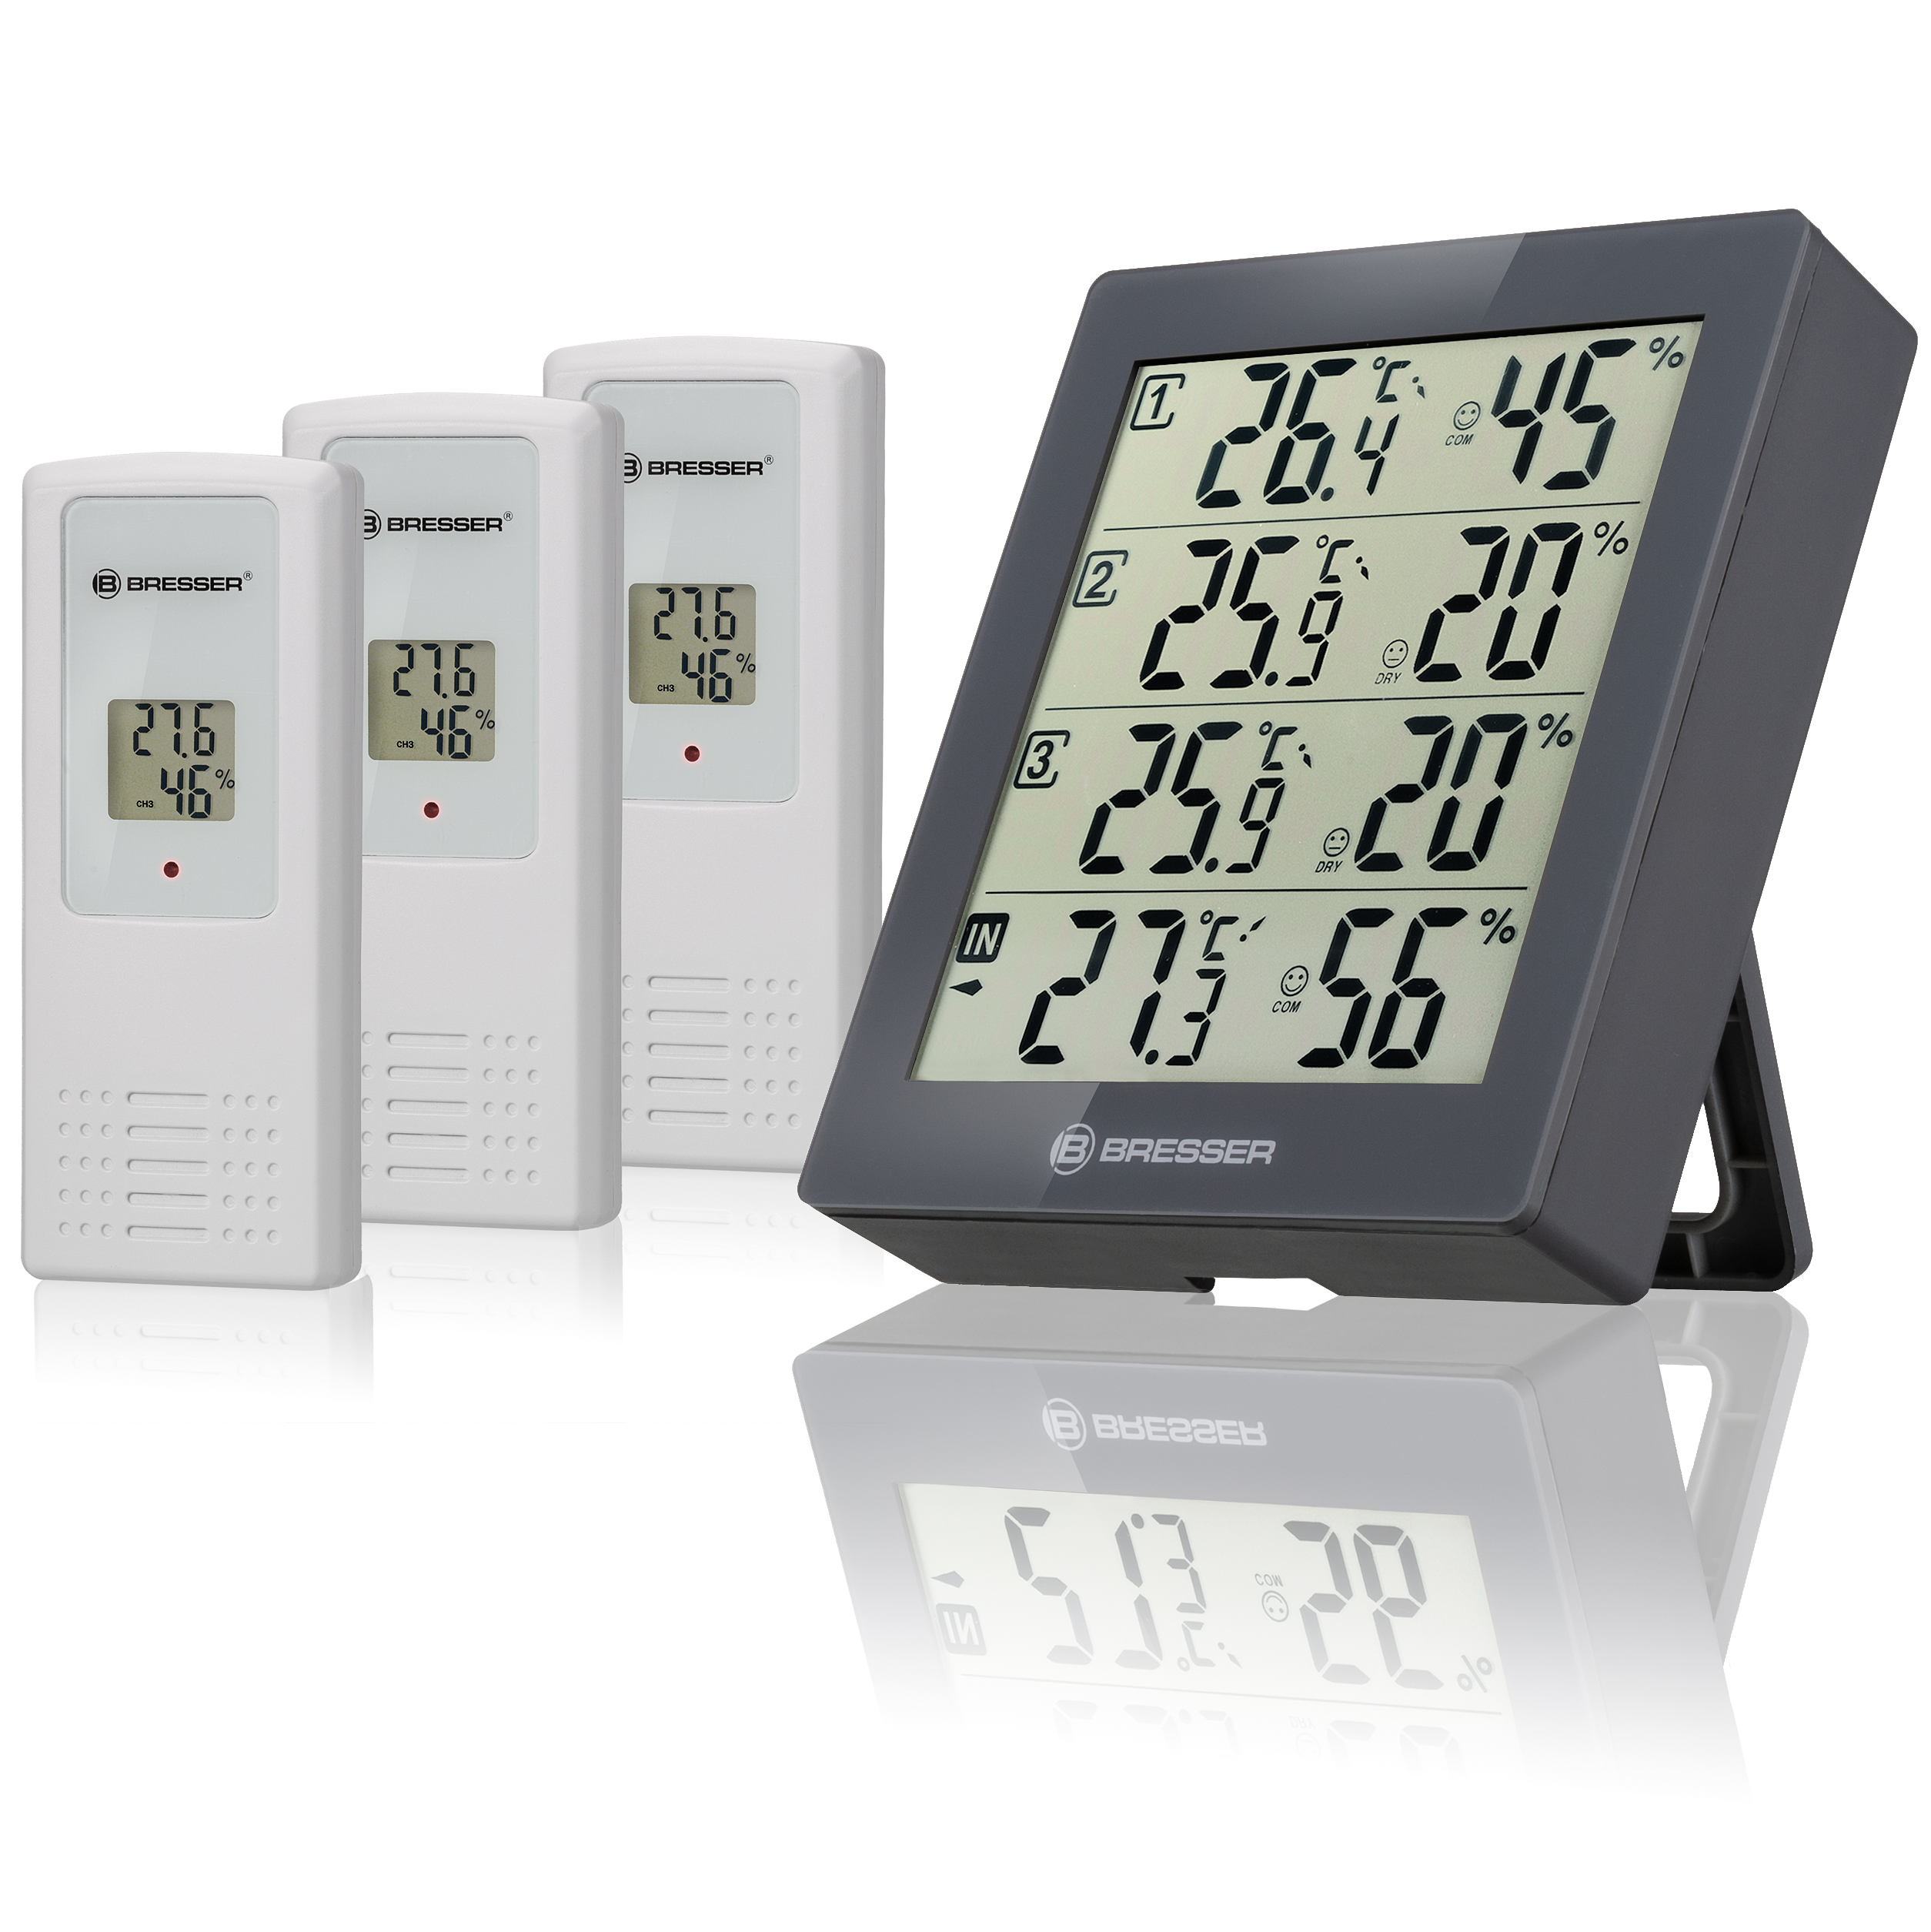 BRESSER ClimaTrend Hygro Quadro - thermo- and hygrometer with 4 independent measuring details